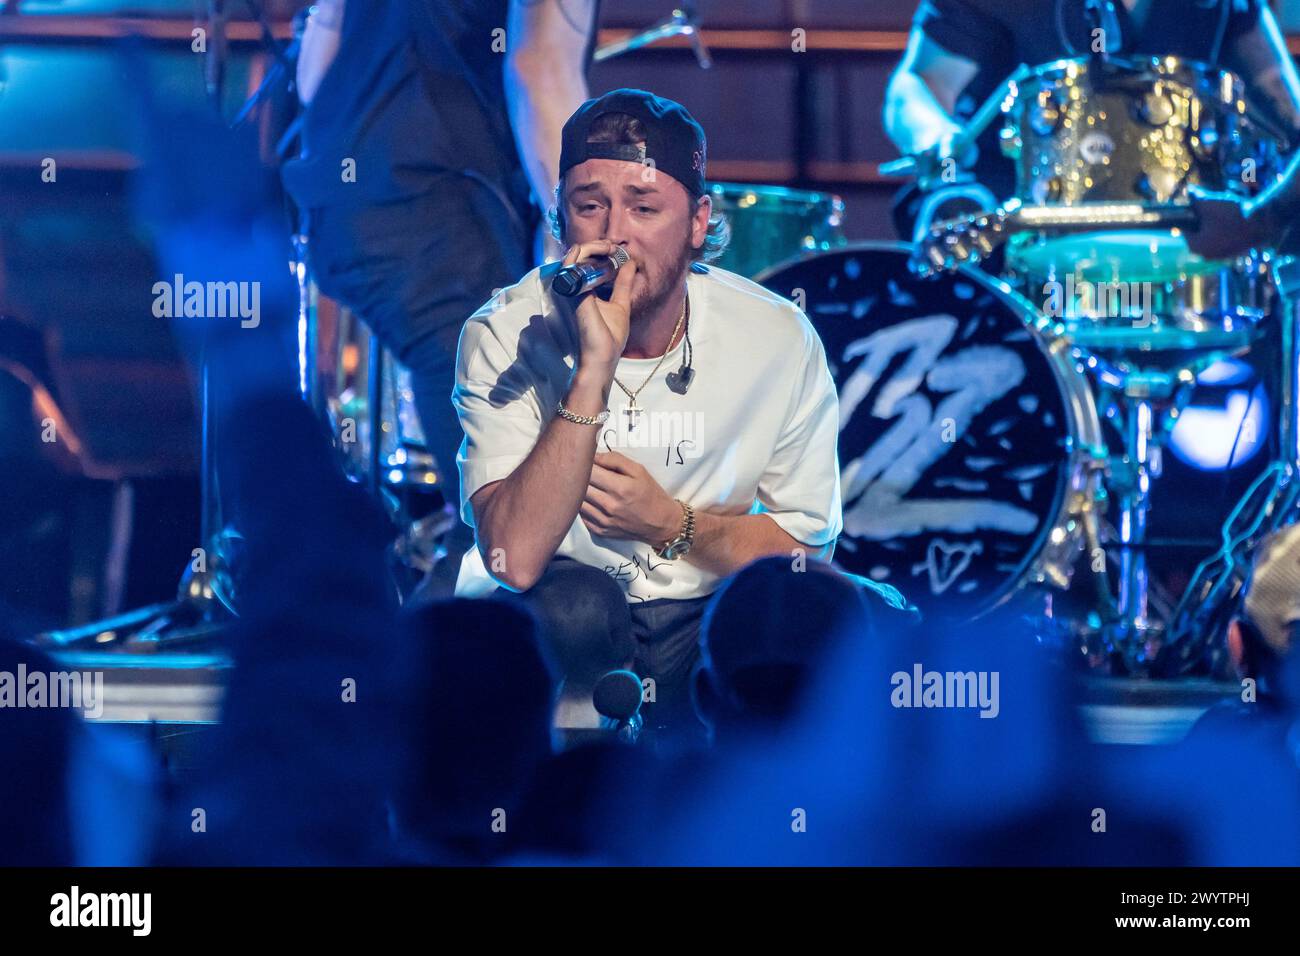 AUSTIN, TEXAS - APRIL 07: In this image released on April 07, 2024, Bailey Zimmerman performs on the 2024 CMT Music Awards stage on April 3, 2024, at the University of Texas at Austin in Austin, Texas.  (Photo by Amy Price/ImageSPACE) Stock Photo